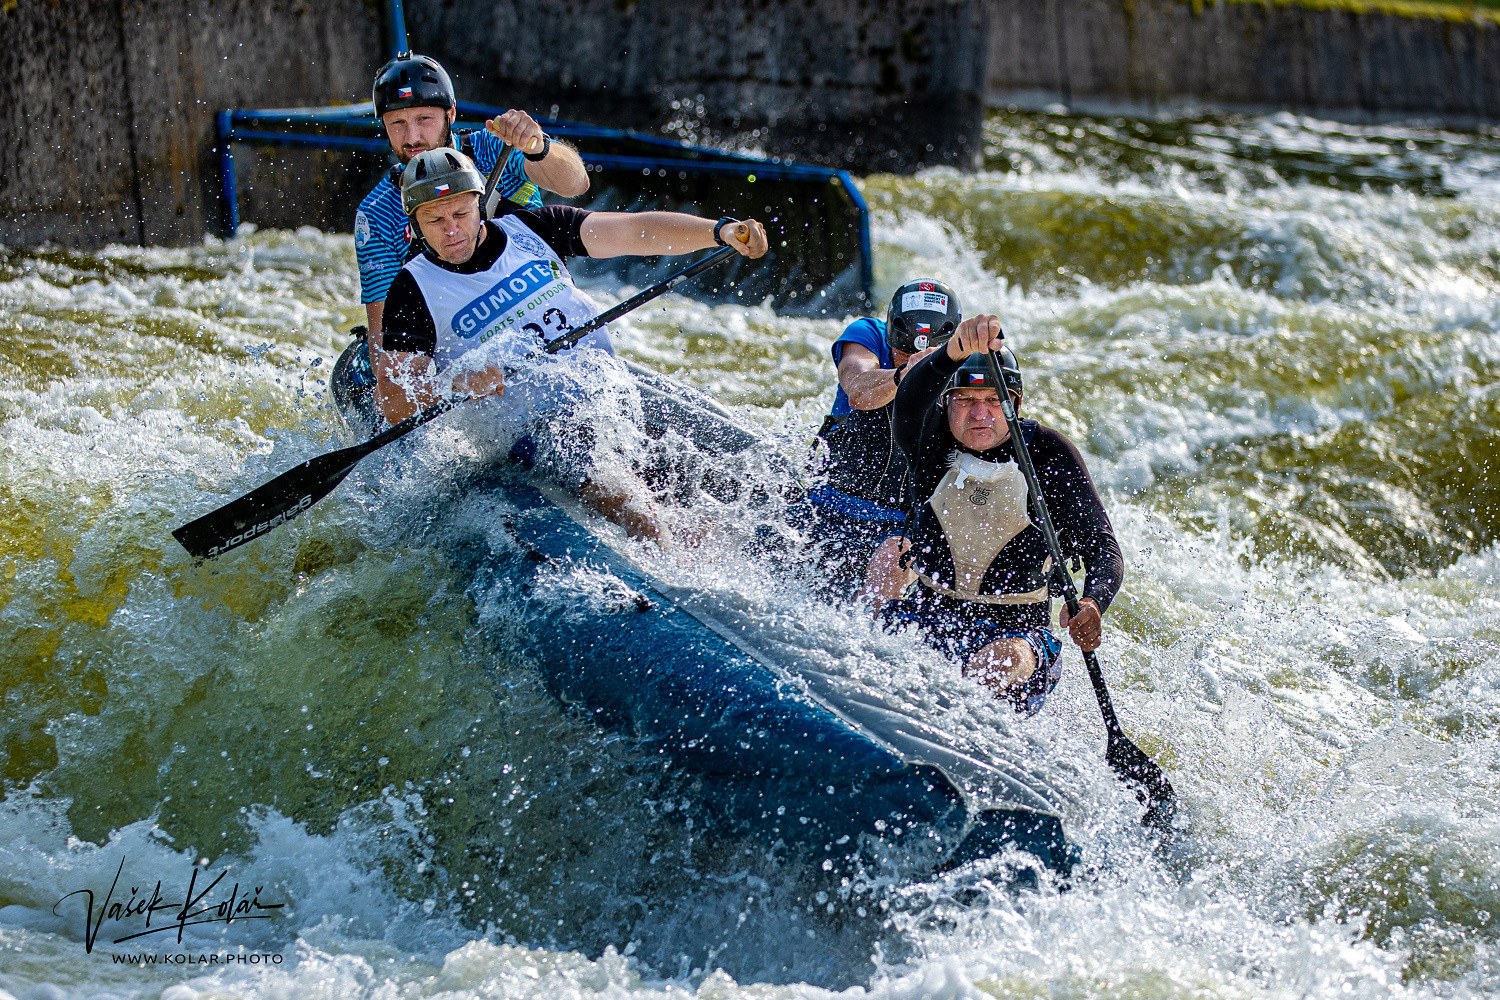 At Congress in 2017 in Japan, IRF national members voted unanimously for the adoption of an Athletes’ Commission, with voting representation on the Board of Directors ©International Rafting Federation